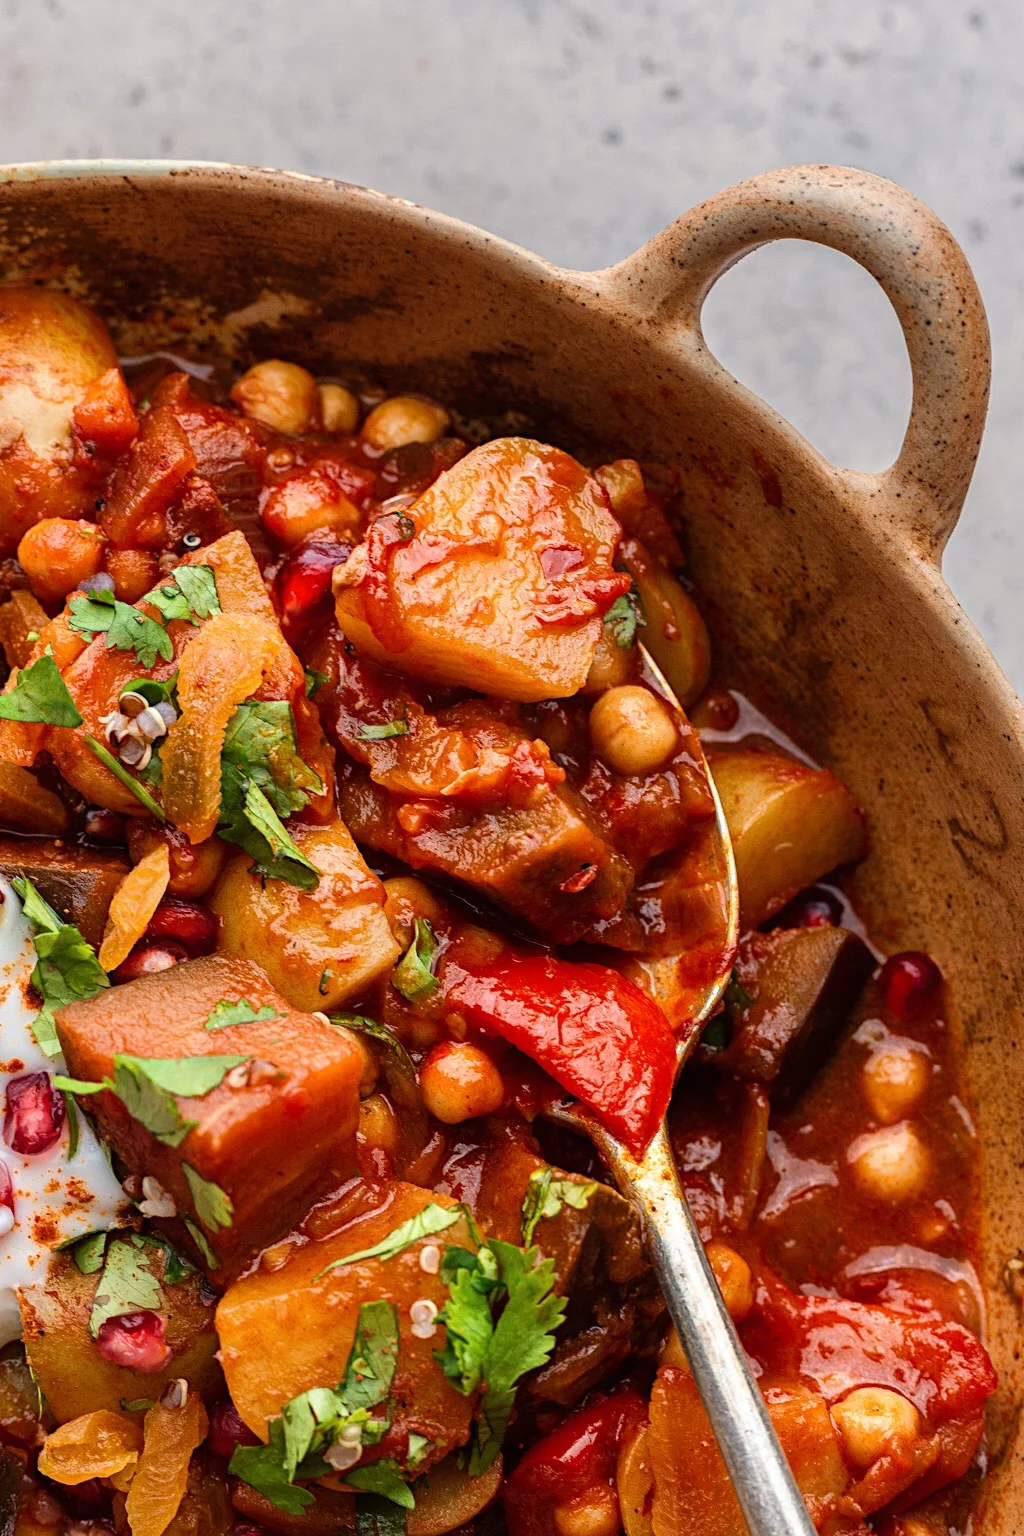 Harissa Vegetable and Chickpea Stew in Pan